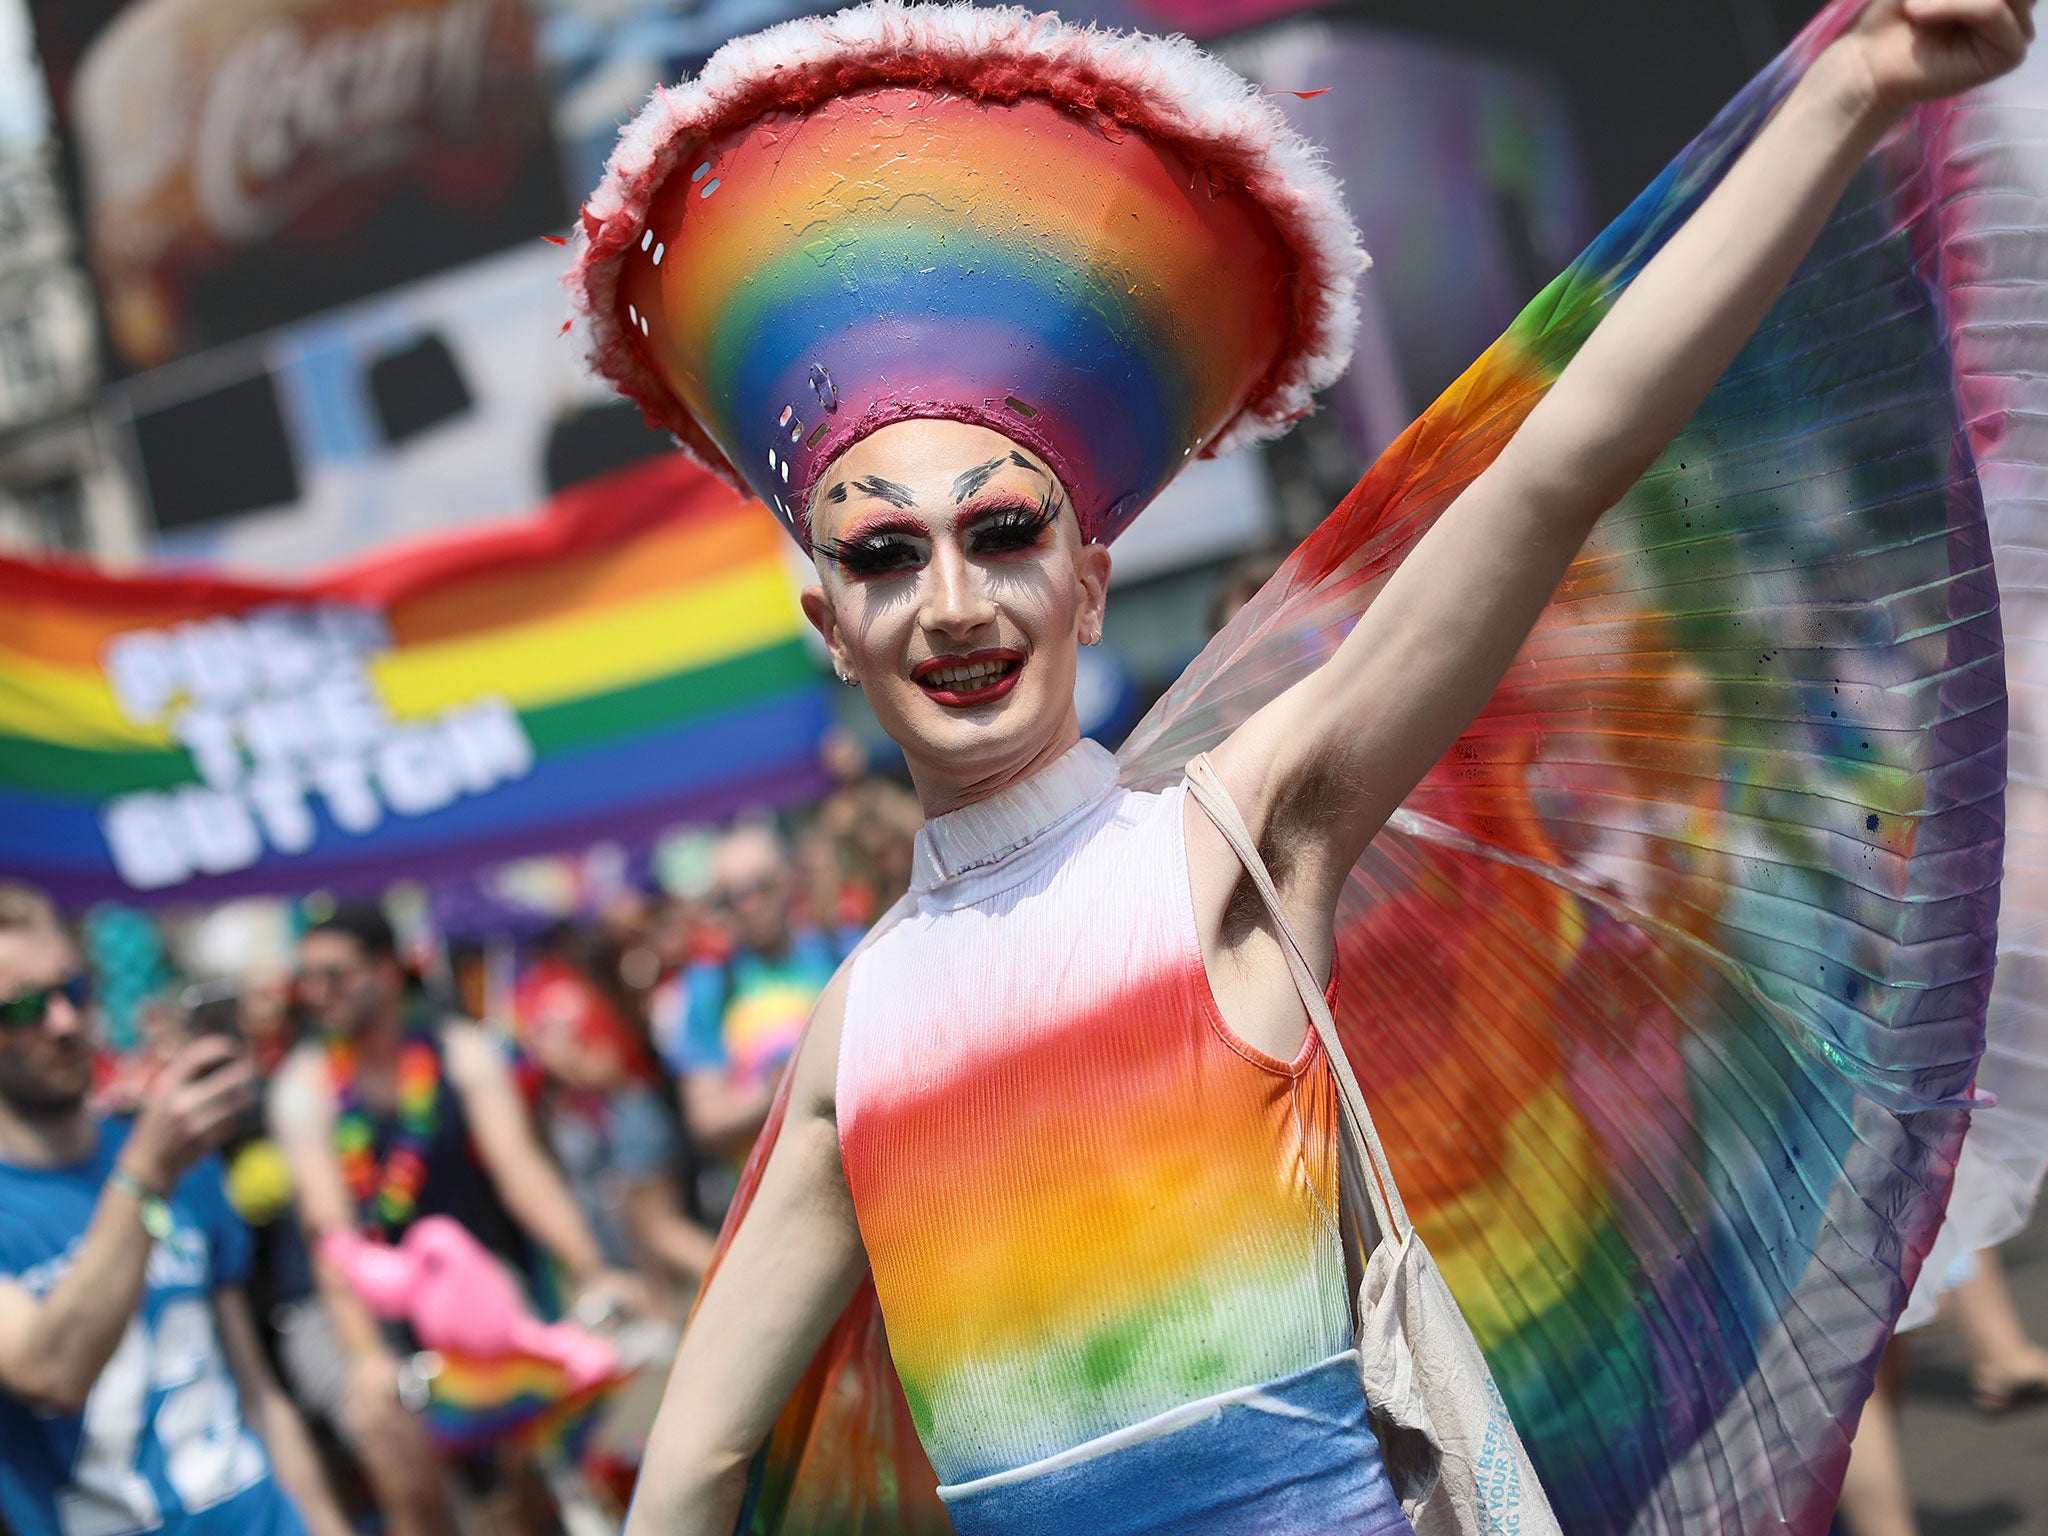 More than a million people are thought to have attended London's Pride parade